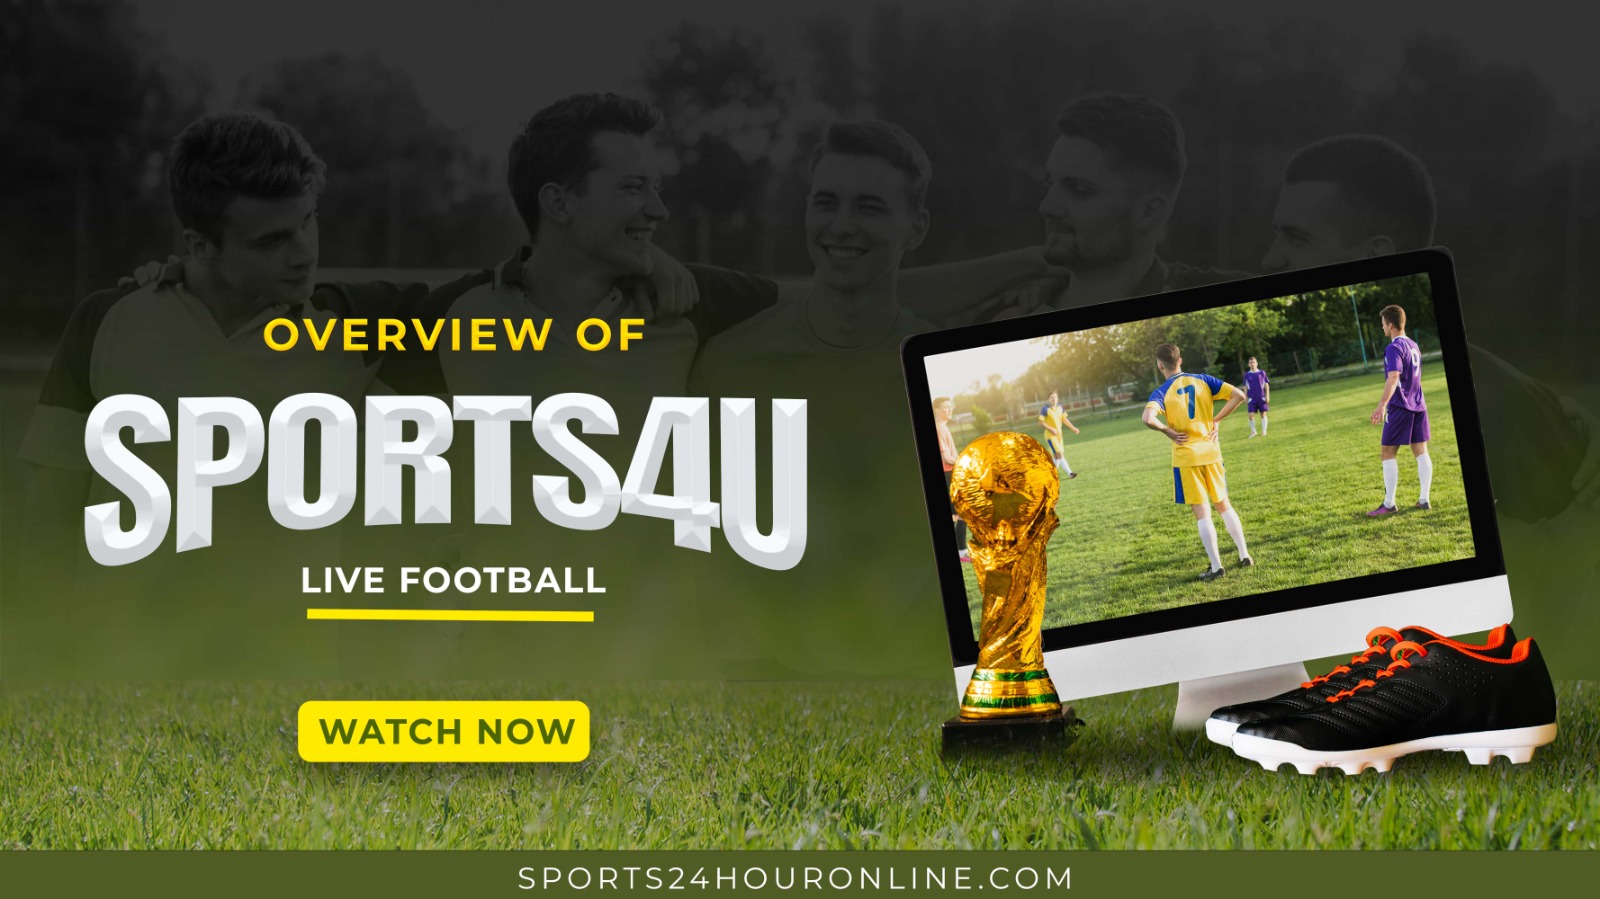 Best Overview of "Sports4U Live Football"